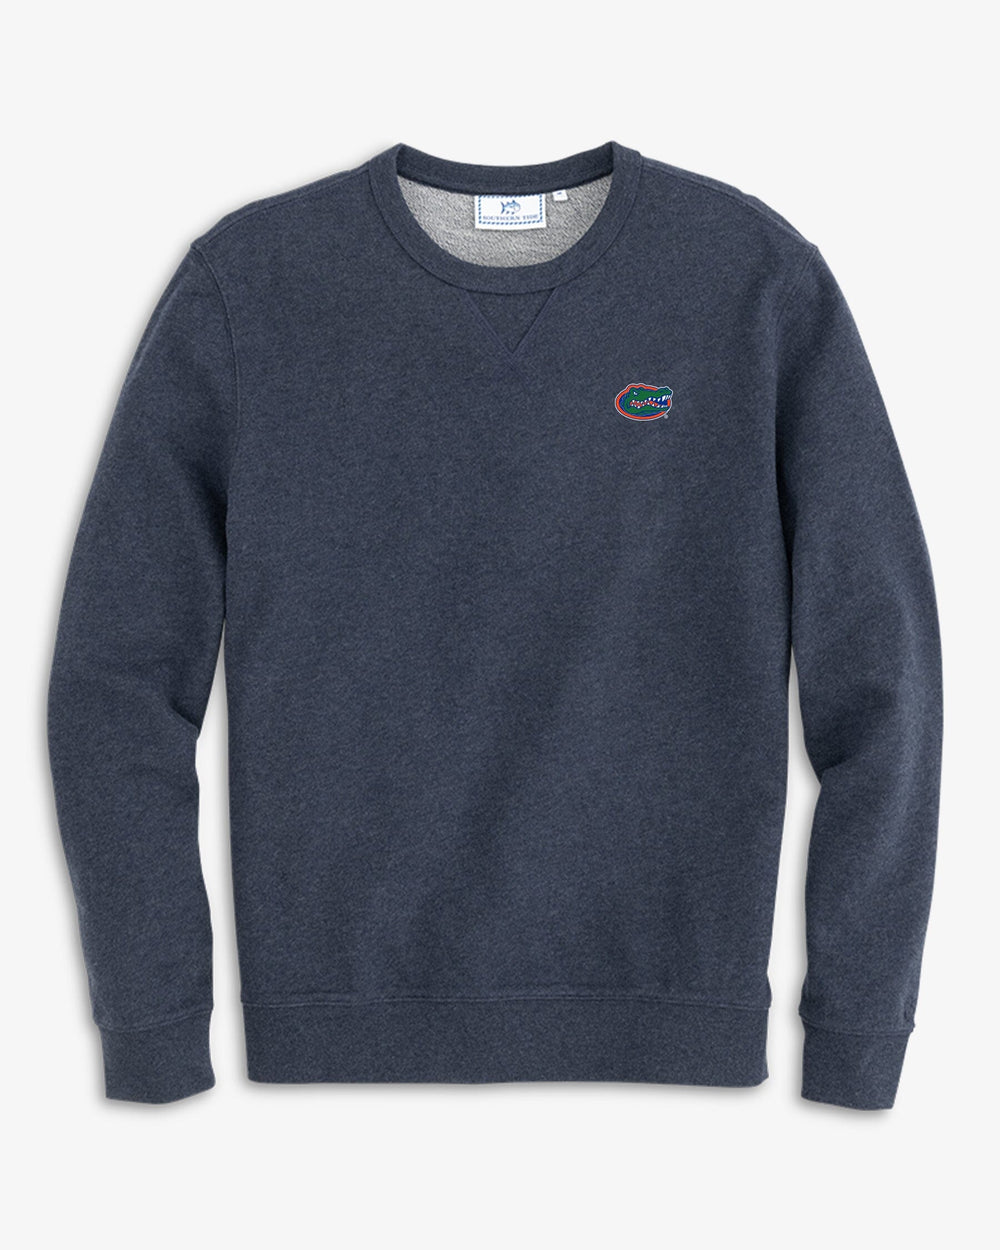 The front view of the Men's Grey Florida Gators Upper Deck Pullover Sweatshirt by Southern Tide - Heather Navy